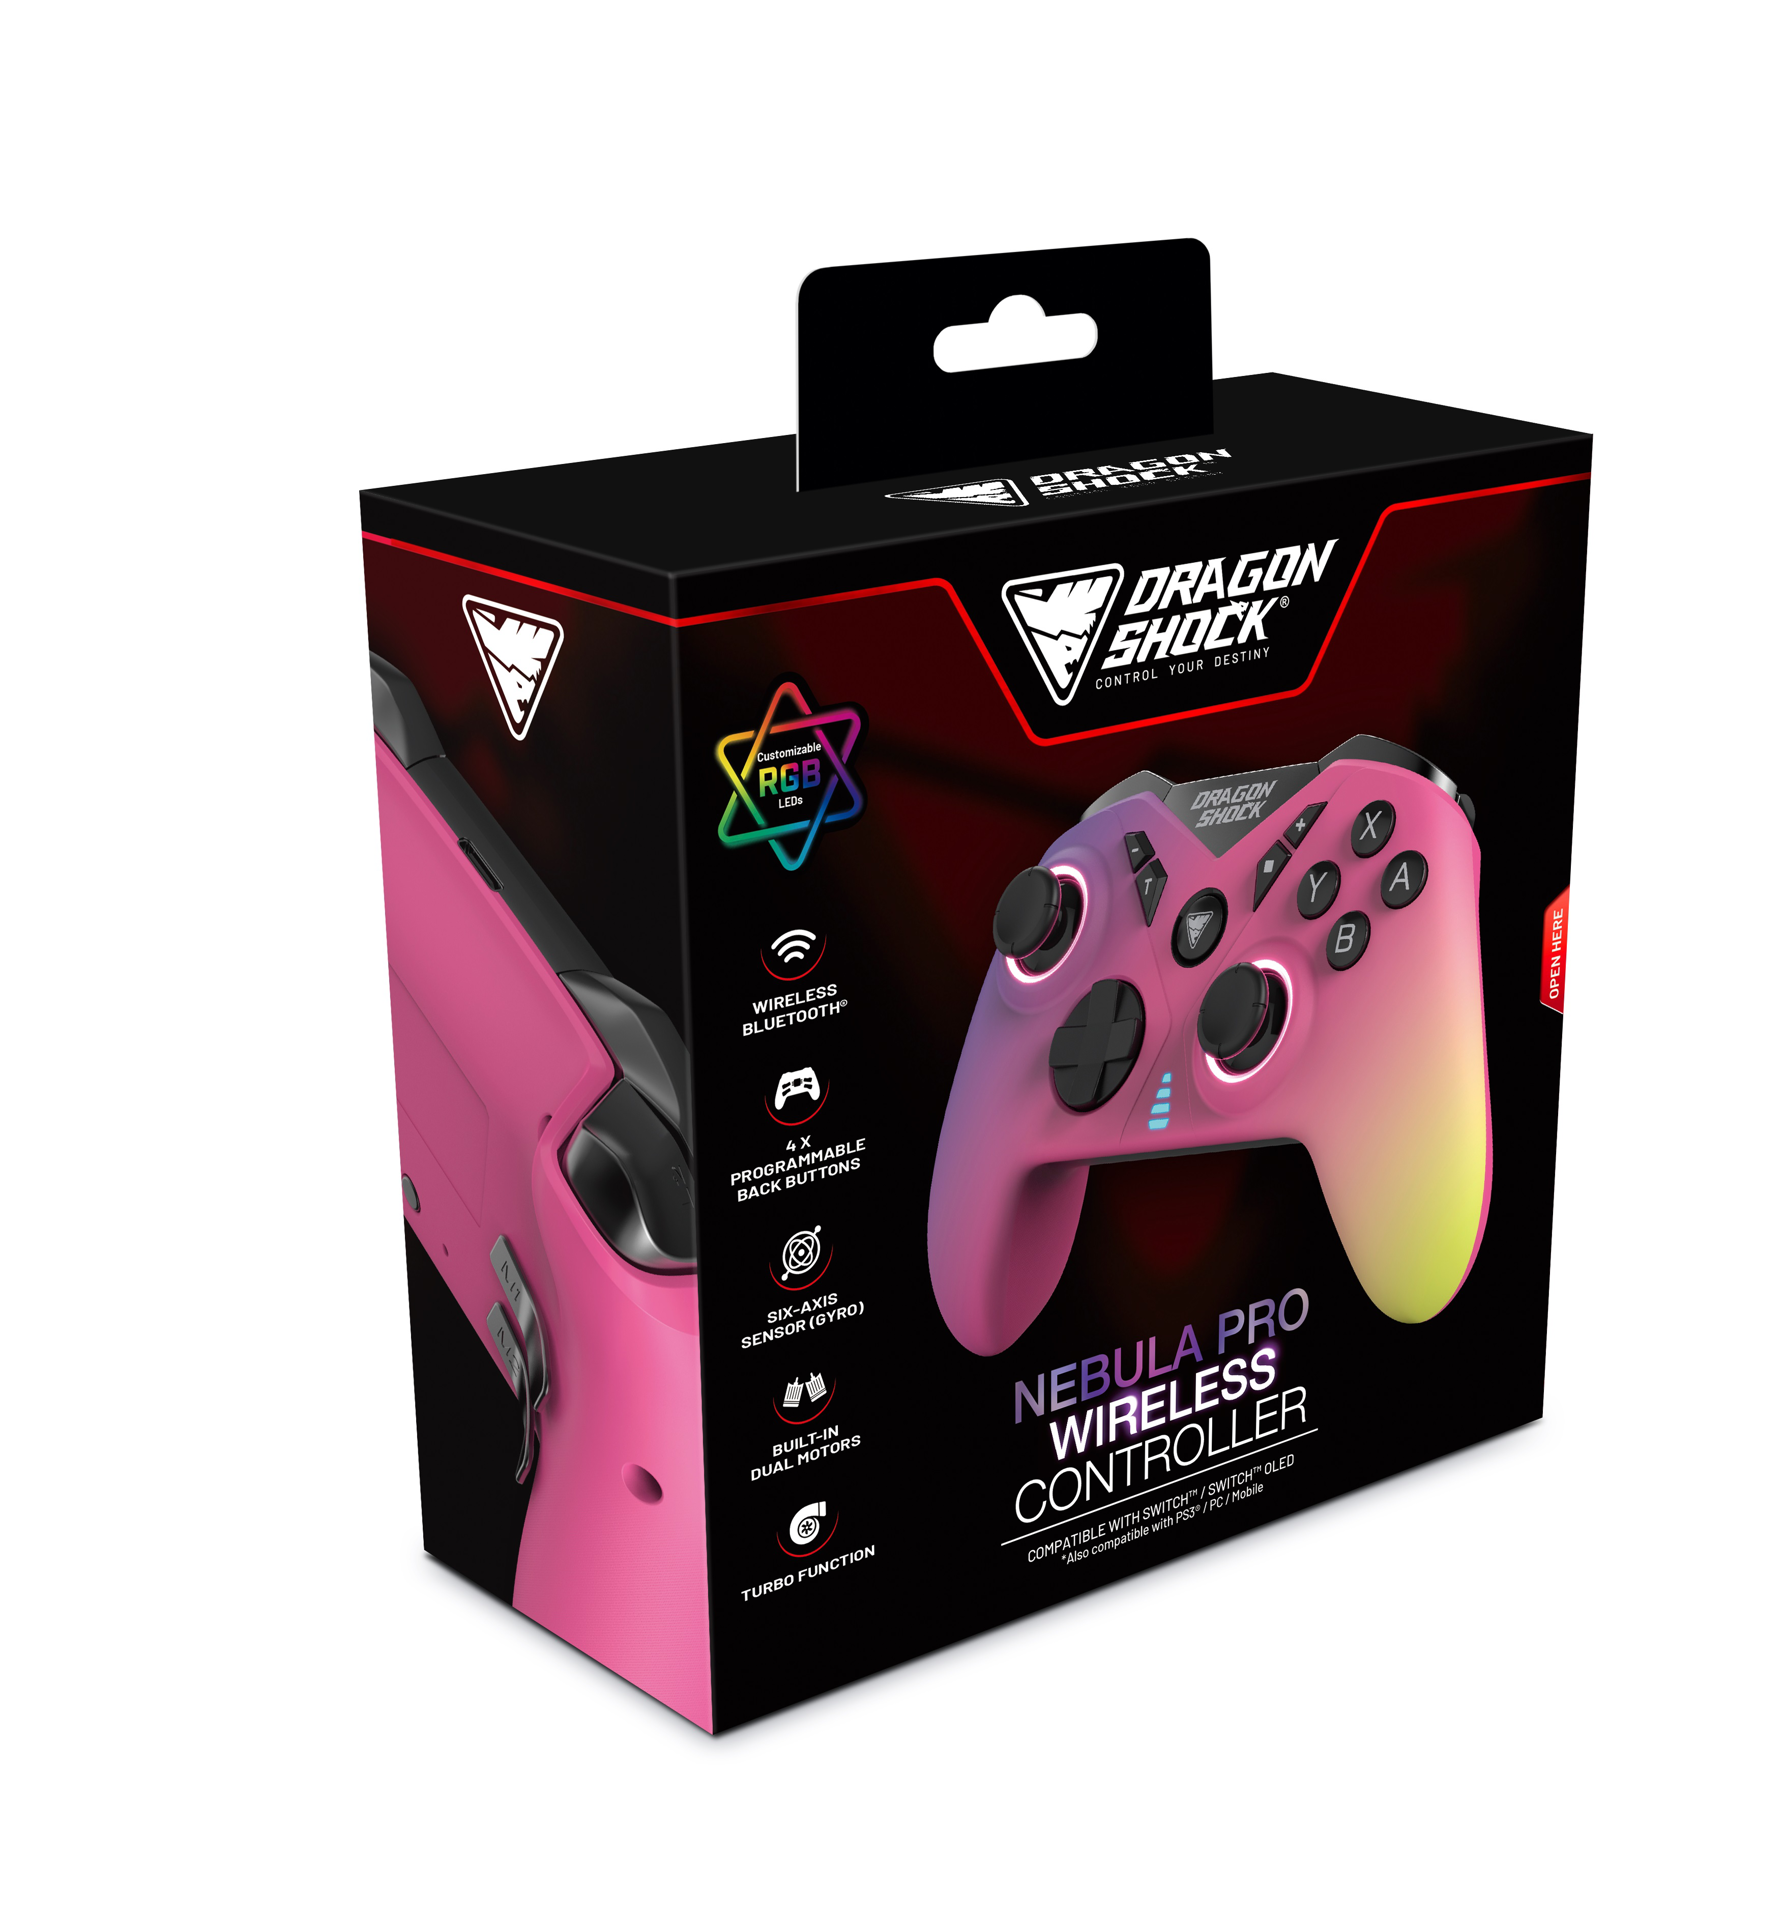 DragonShock - NEBULA ULTIMATE - Manette sans fil Pro Candy pour Nintendo Switch, Switch Lite, Switch OLED, PS3, PC et Android